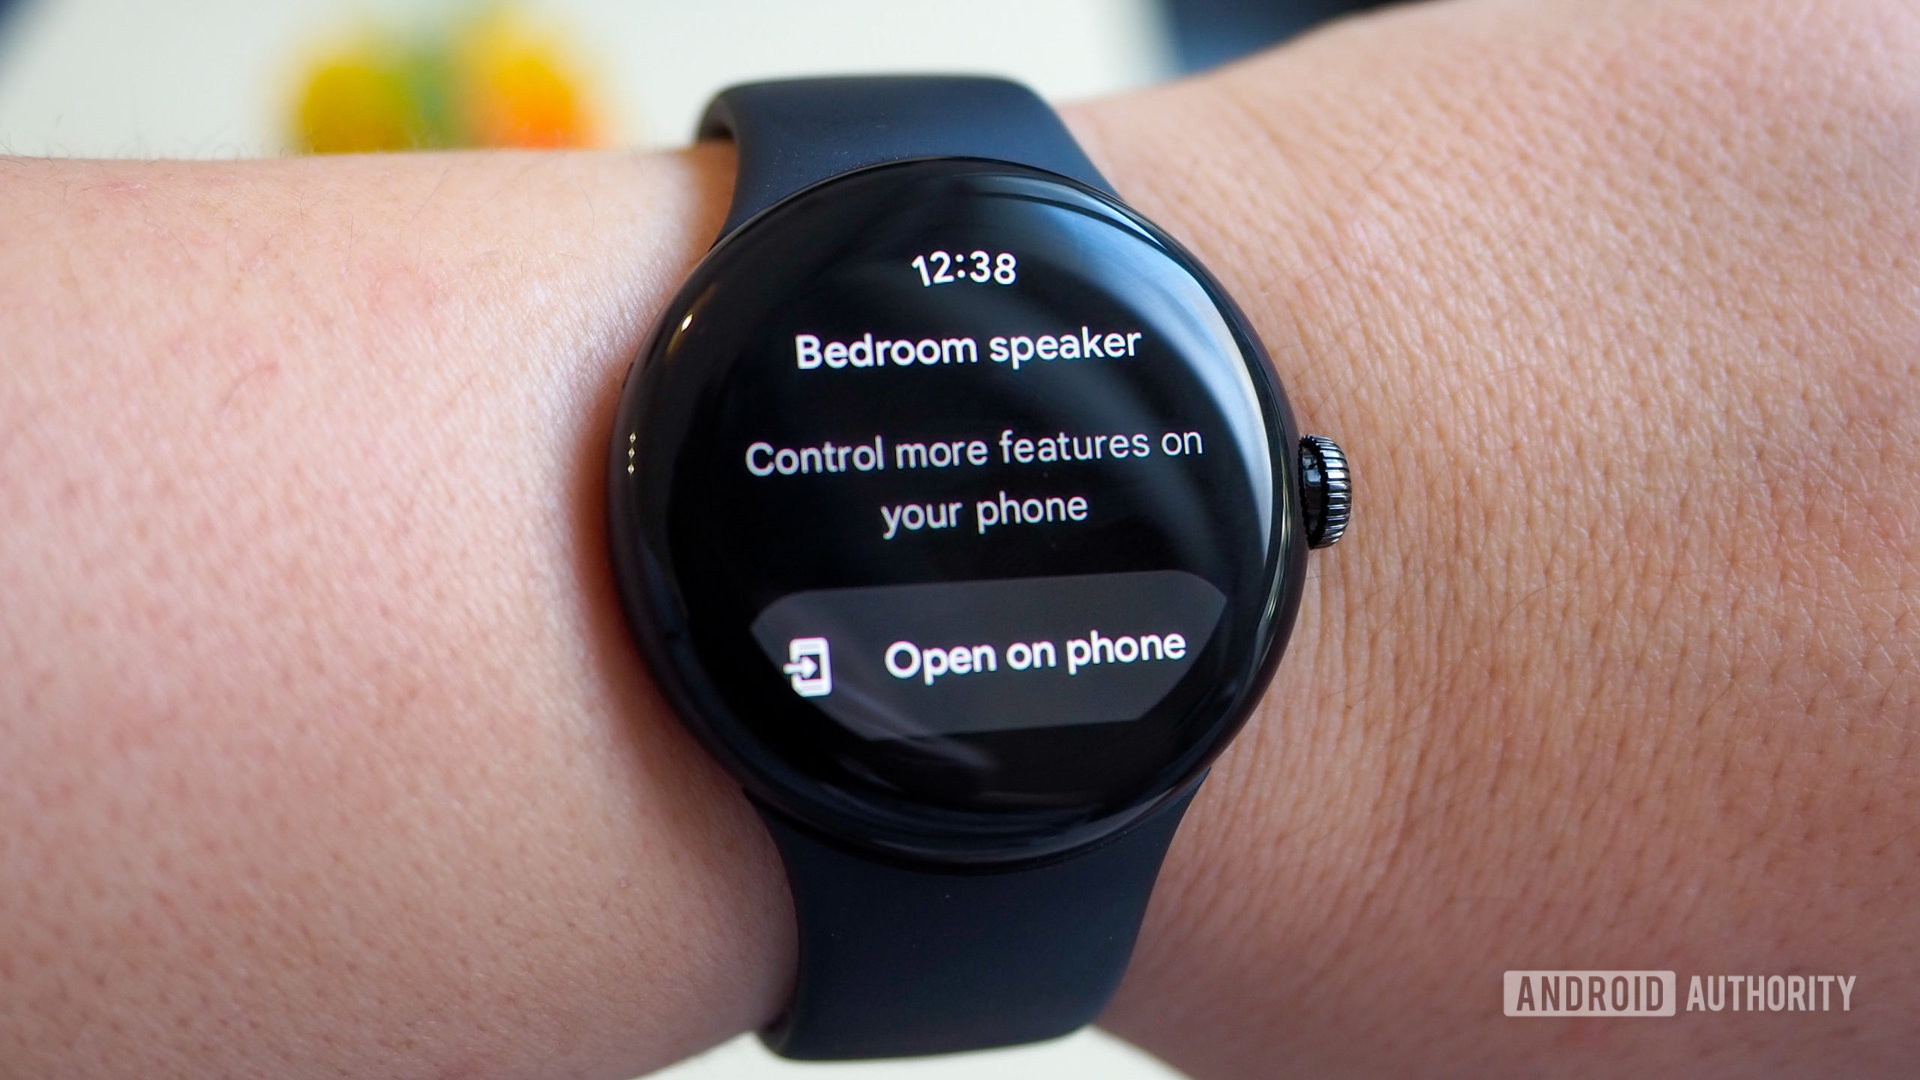 Google Home app on the Pixel Watch showing the notice to open the app on the phone for more controls